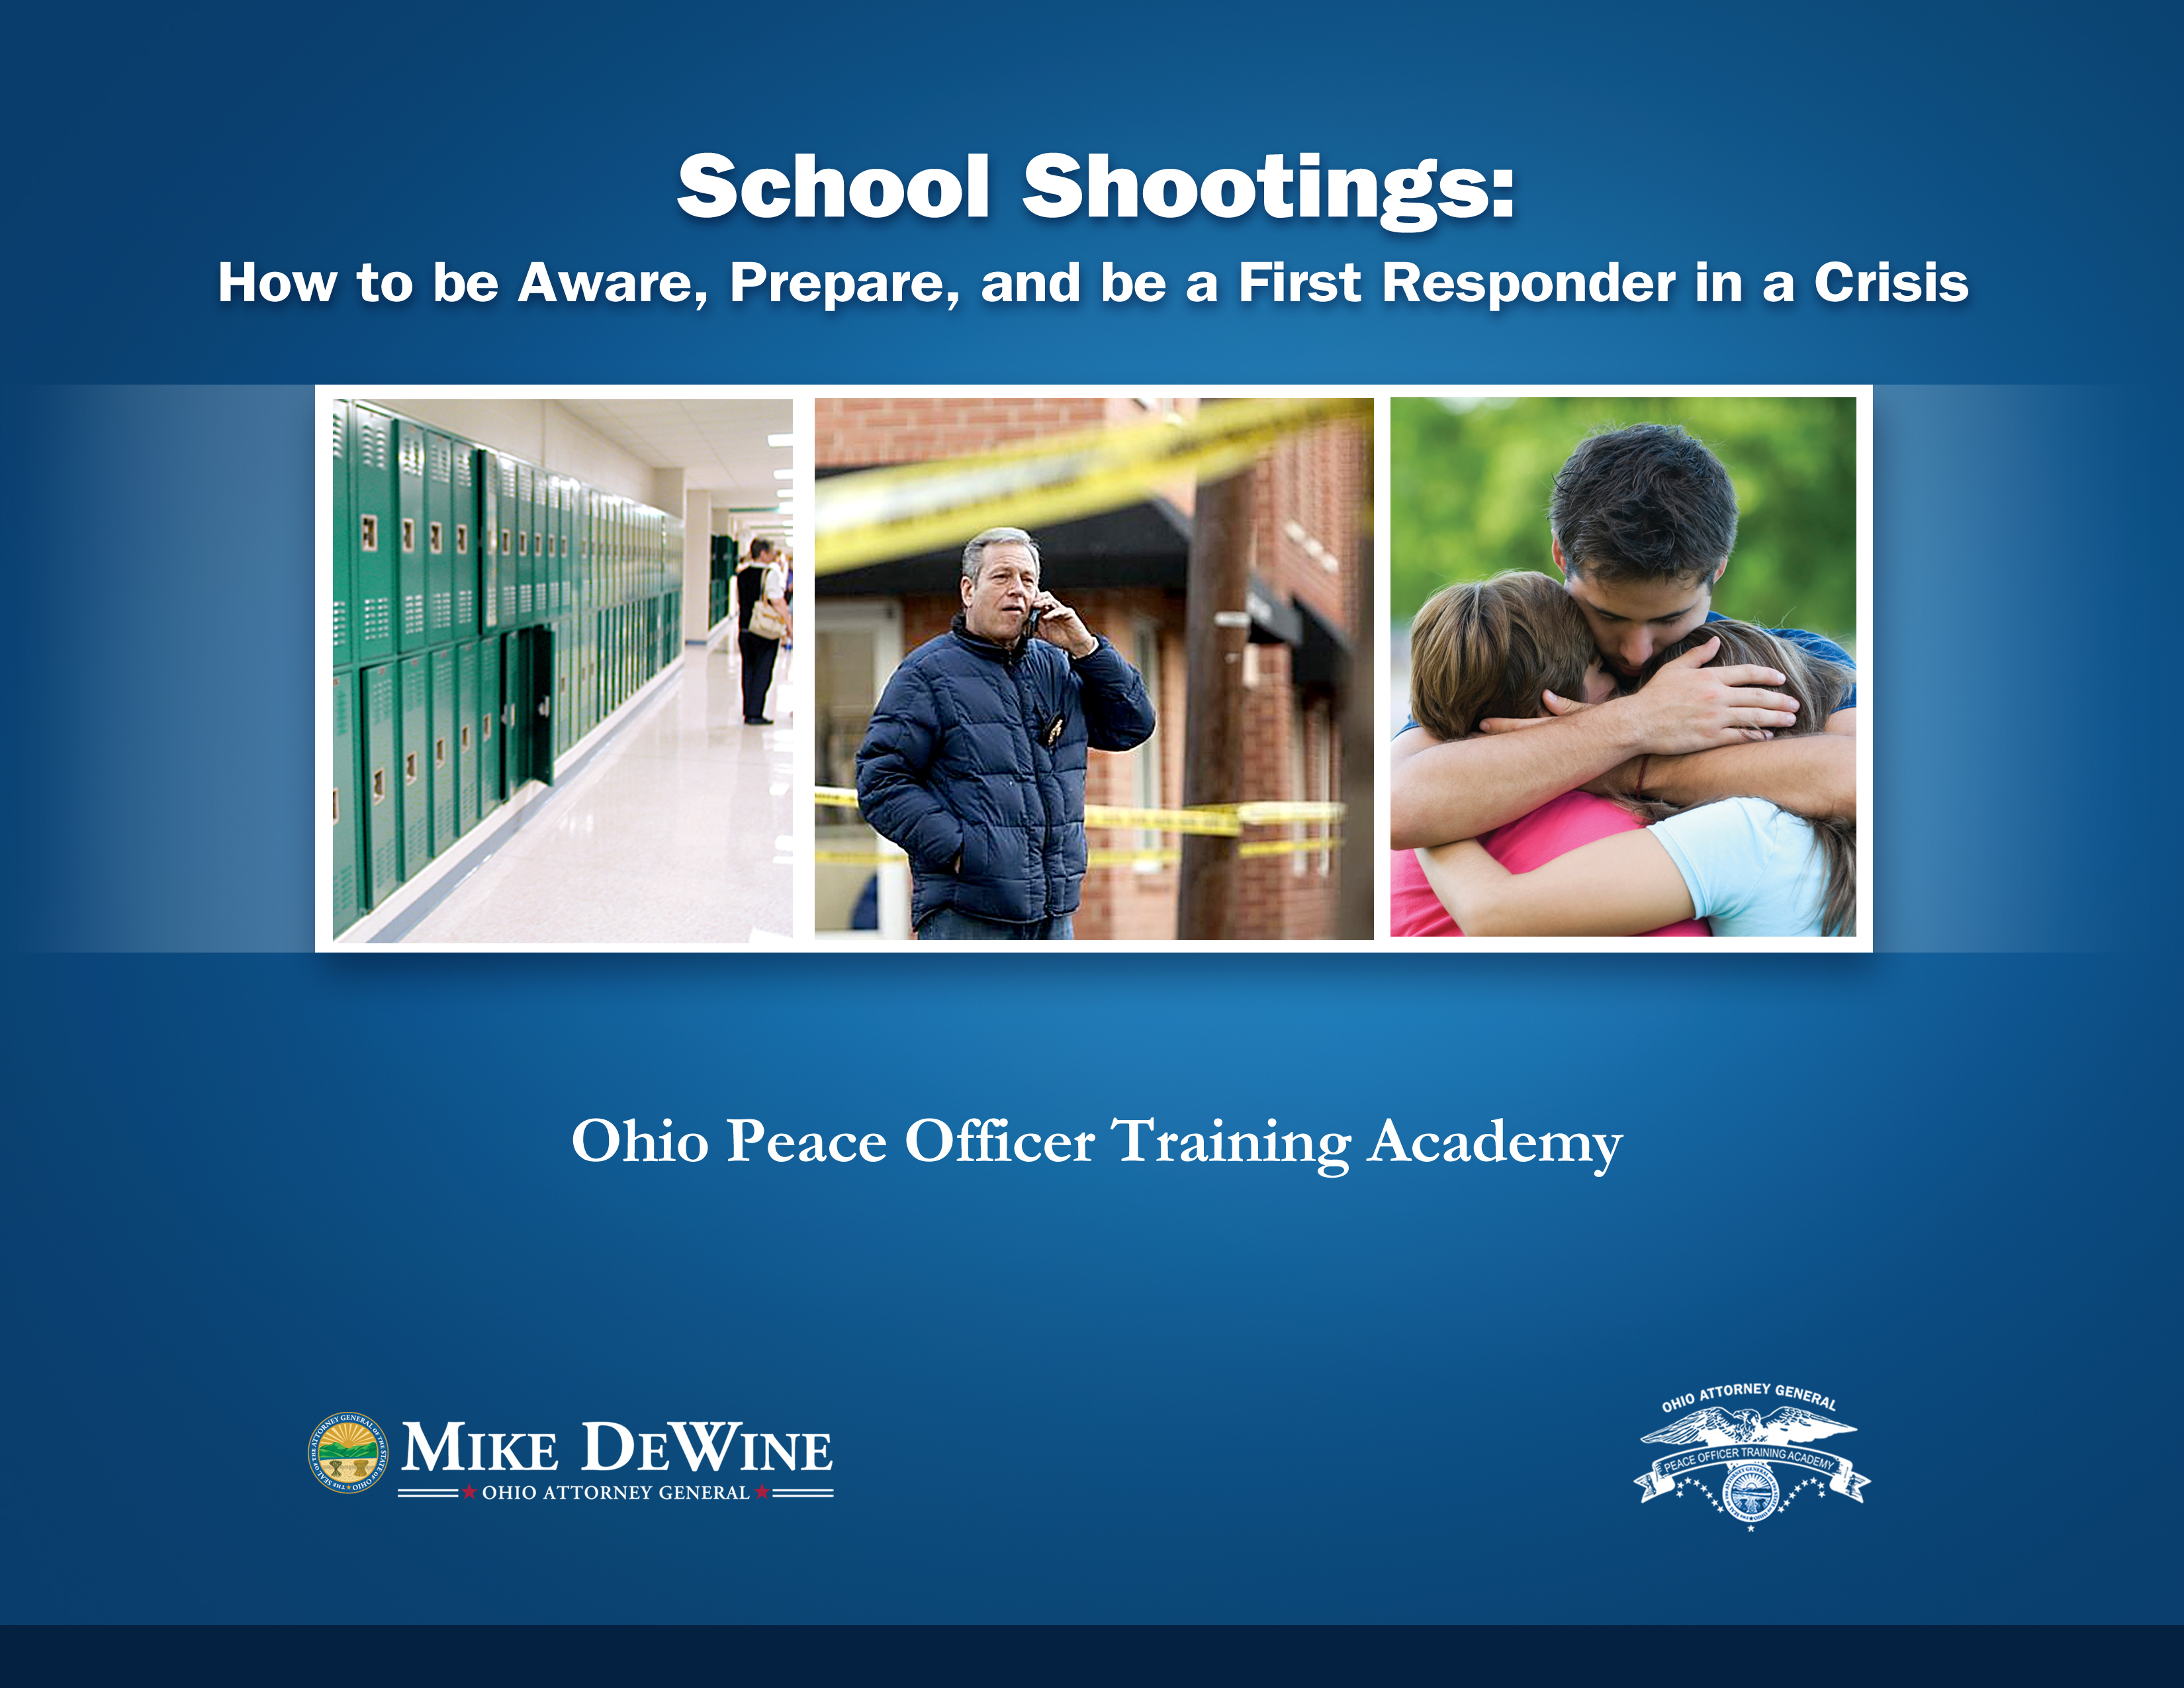 School Shootings: How to be Aware, Prepare, and be a First Responder in a Crisis: James Burke